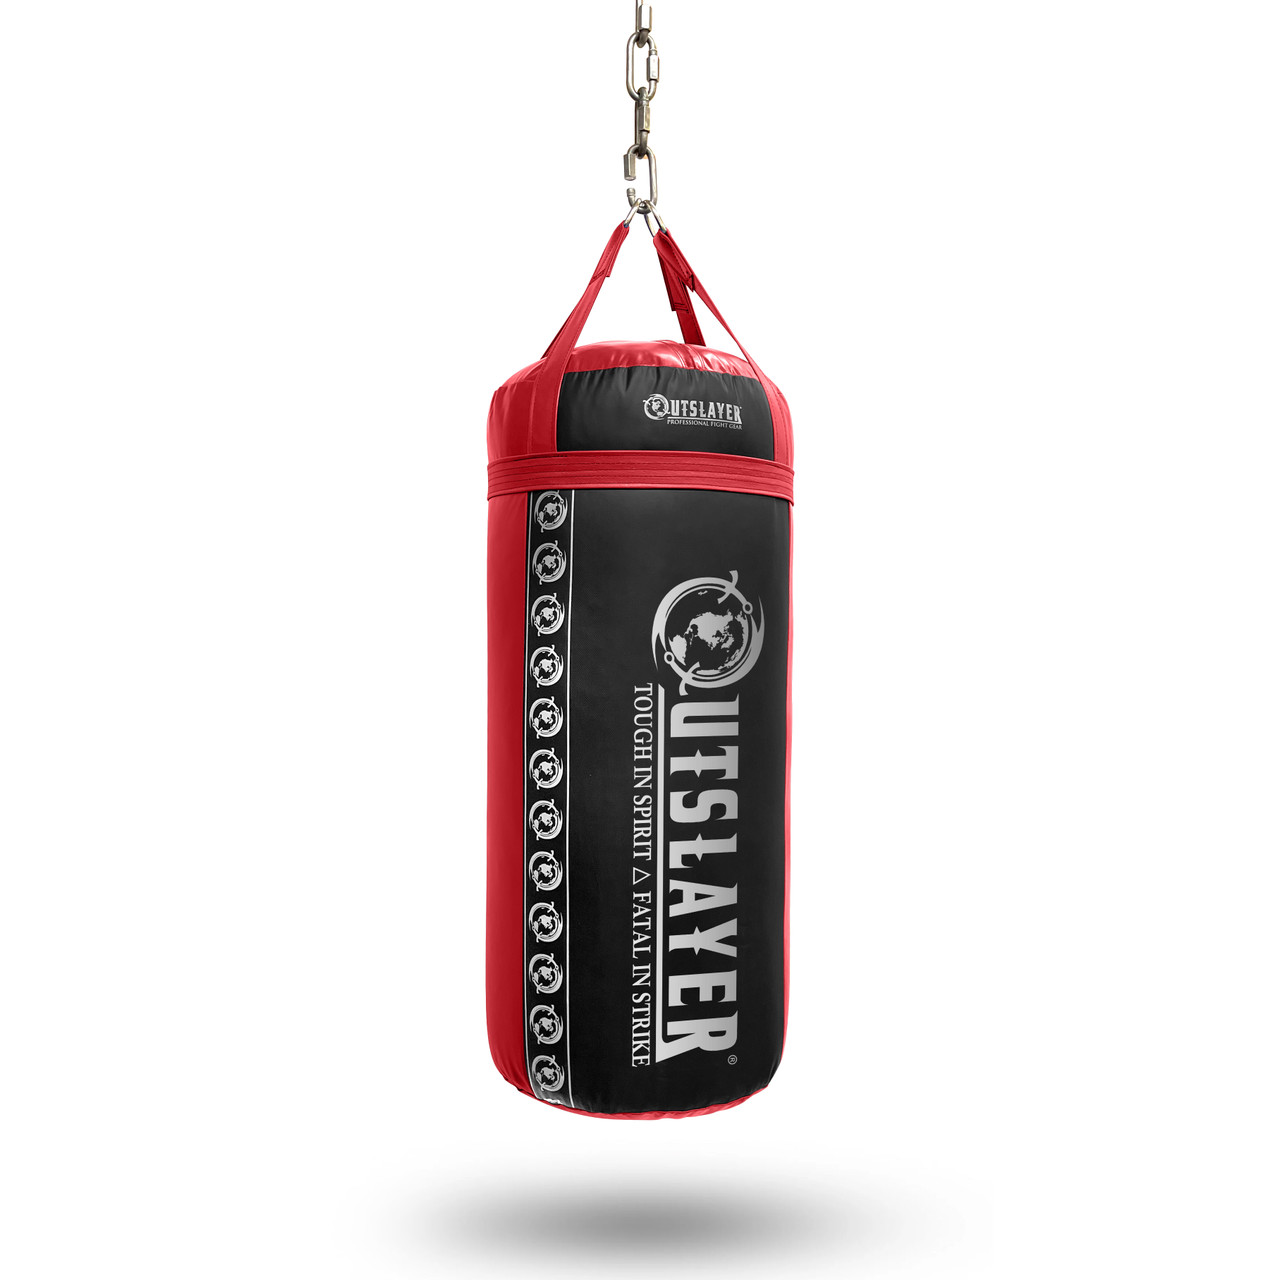 Outslayer 60lb Boxing Heavy Bag